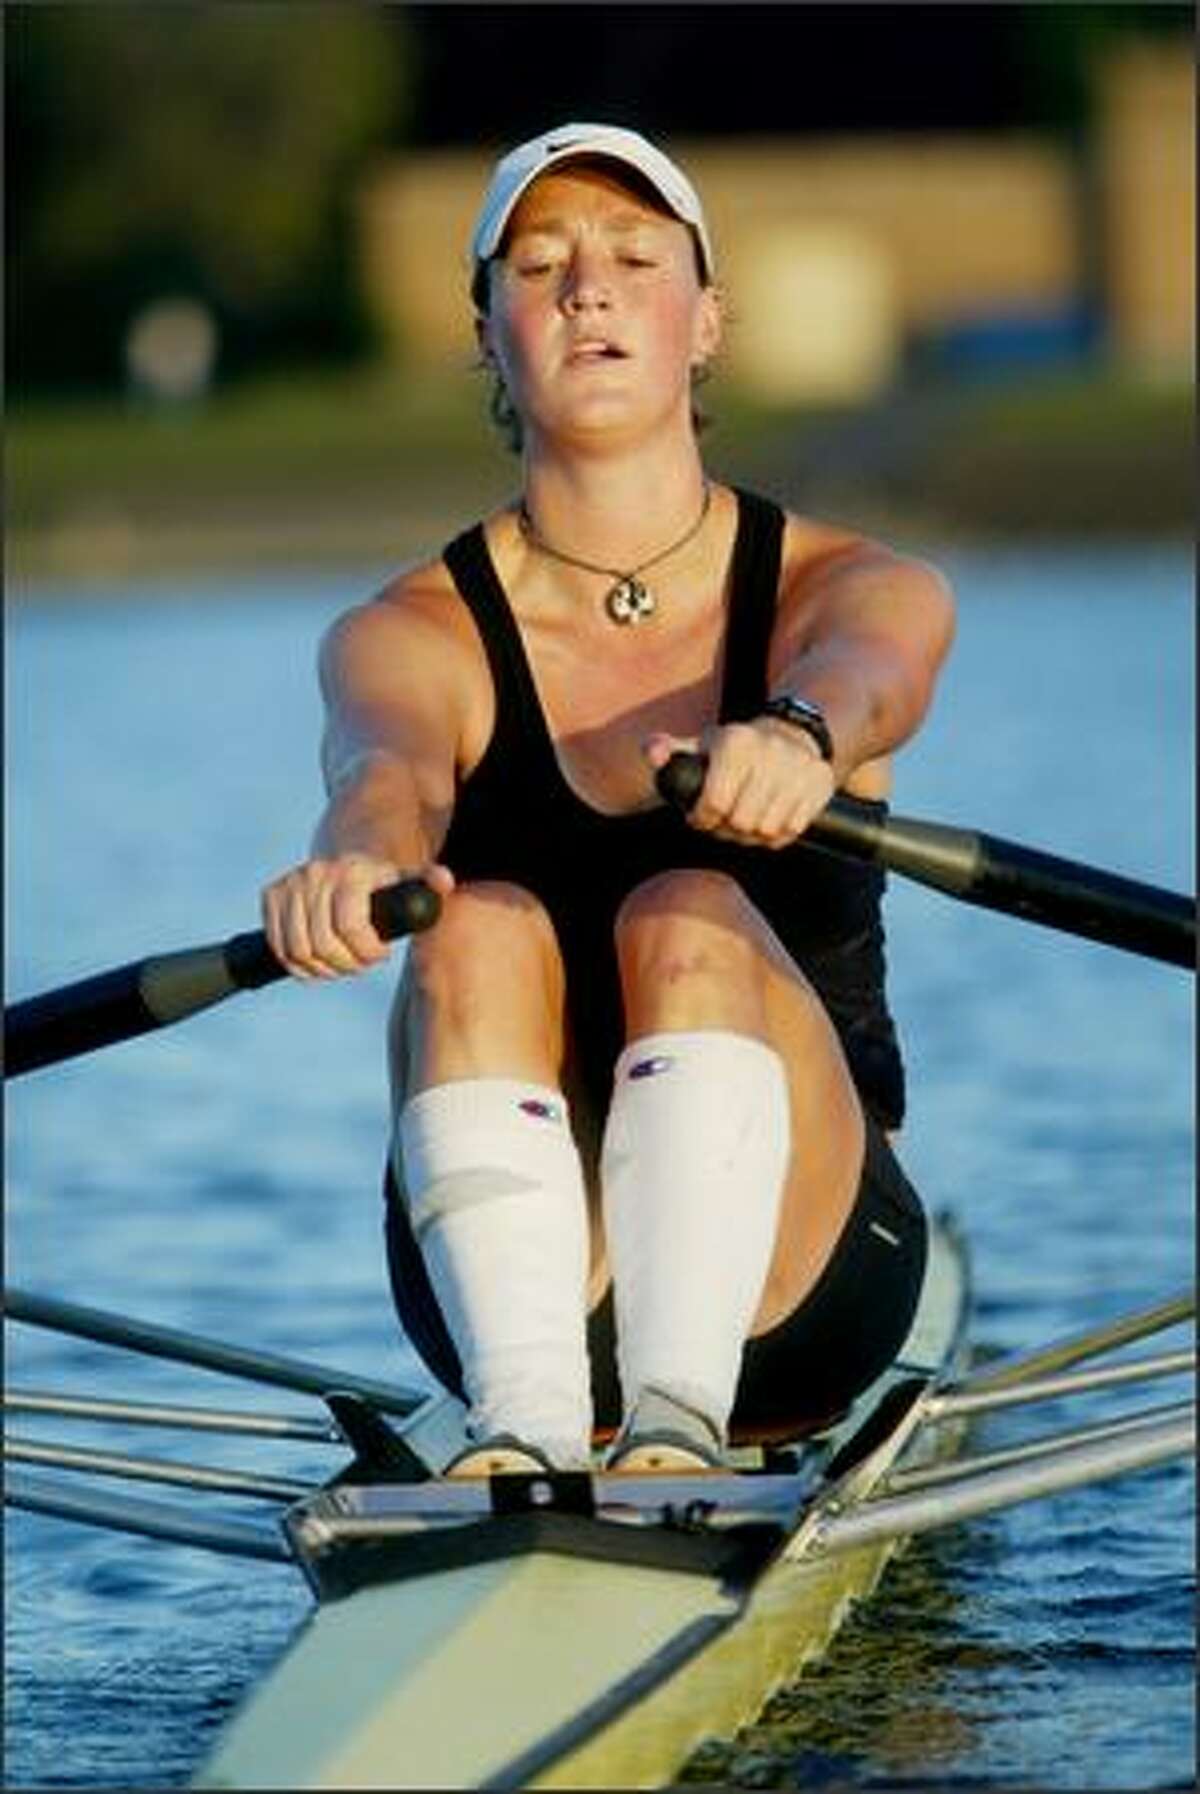 Heidi Dietrich, 27, works out on Green Lake in preparation for this week's USRowing Masters National Championships. Dietrich, who started rowing in high school, will compete in at least three events this week.